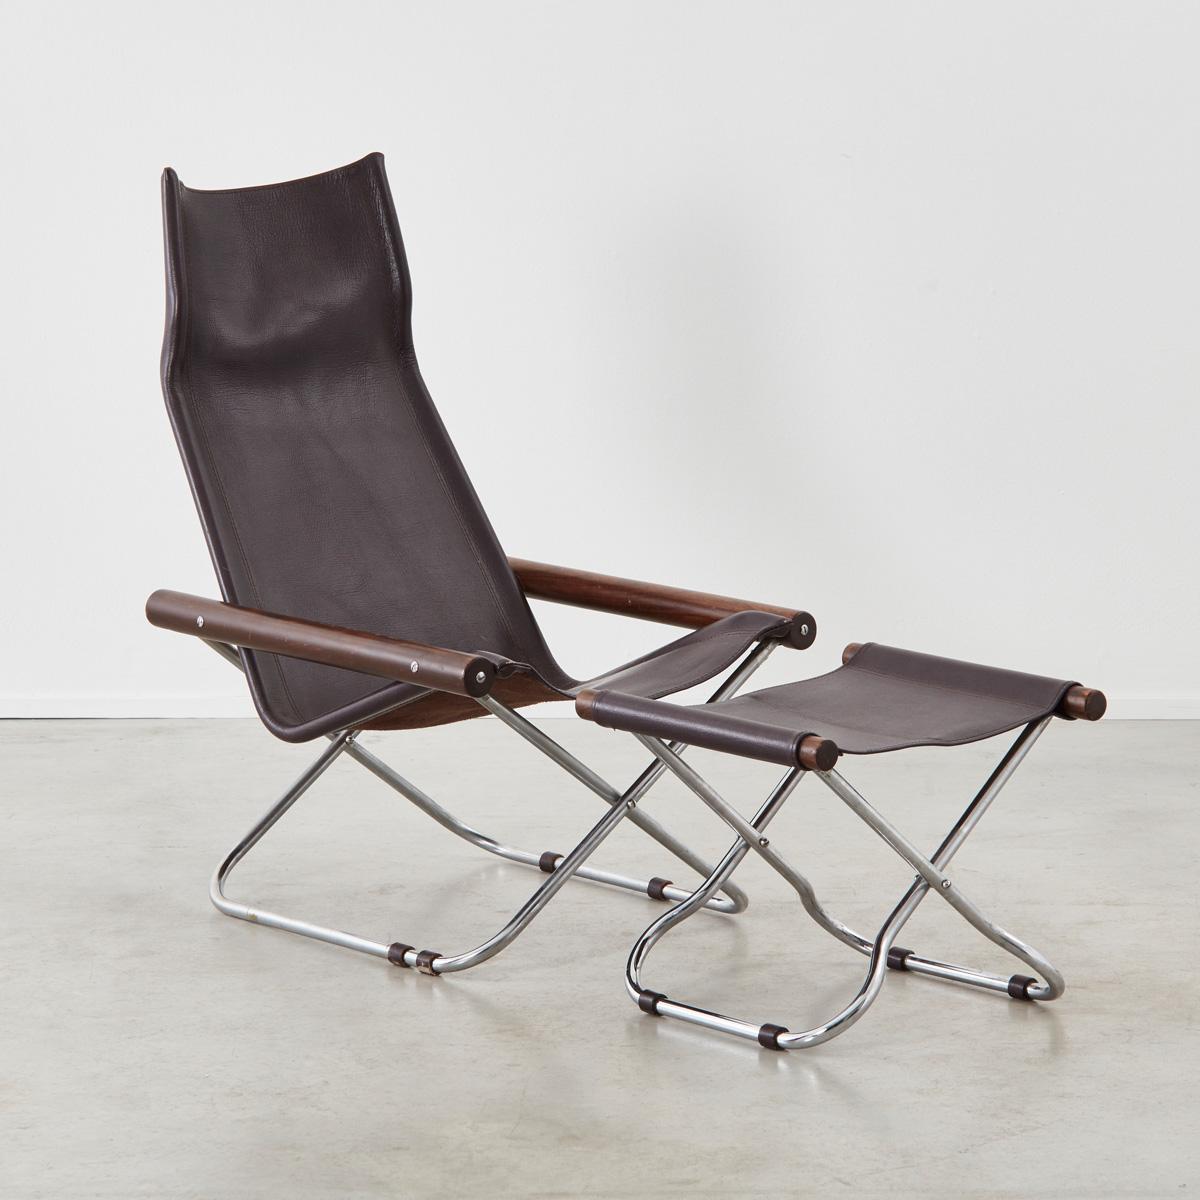 A winner of several design awards and a permanent part of the collection of MoMA, the ‘NY’ chair is a highly esteemed example of modern design. Created in 1958 by Japanese designer Takeshi Nii, the format of the chair was inspired by foldaway